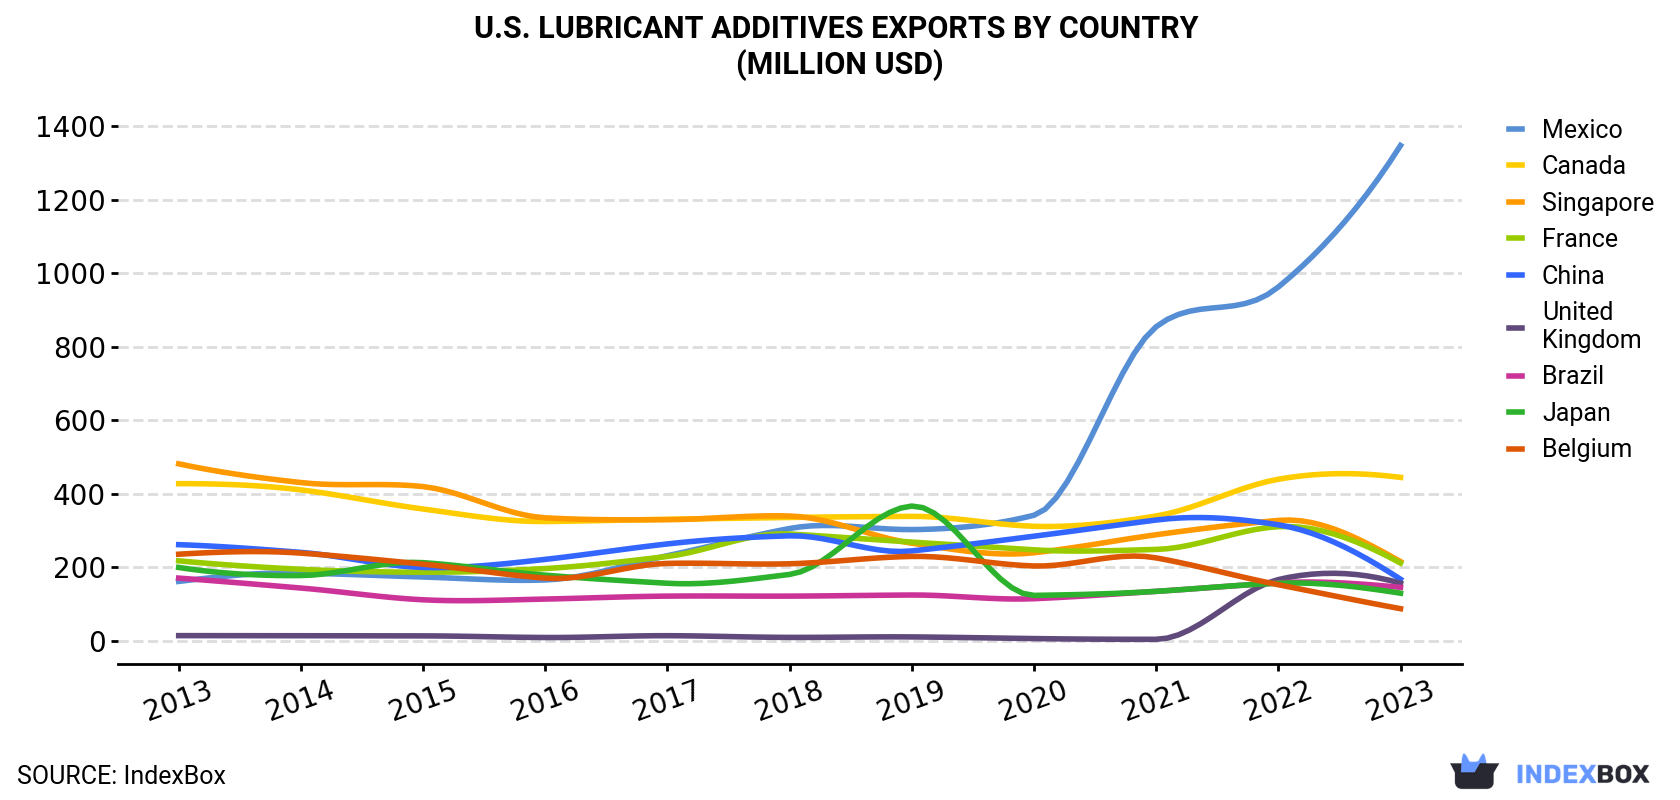 U.S. Lubricant Additives Exports By Country (Million USD)